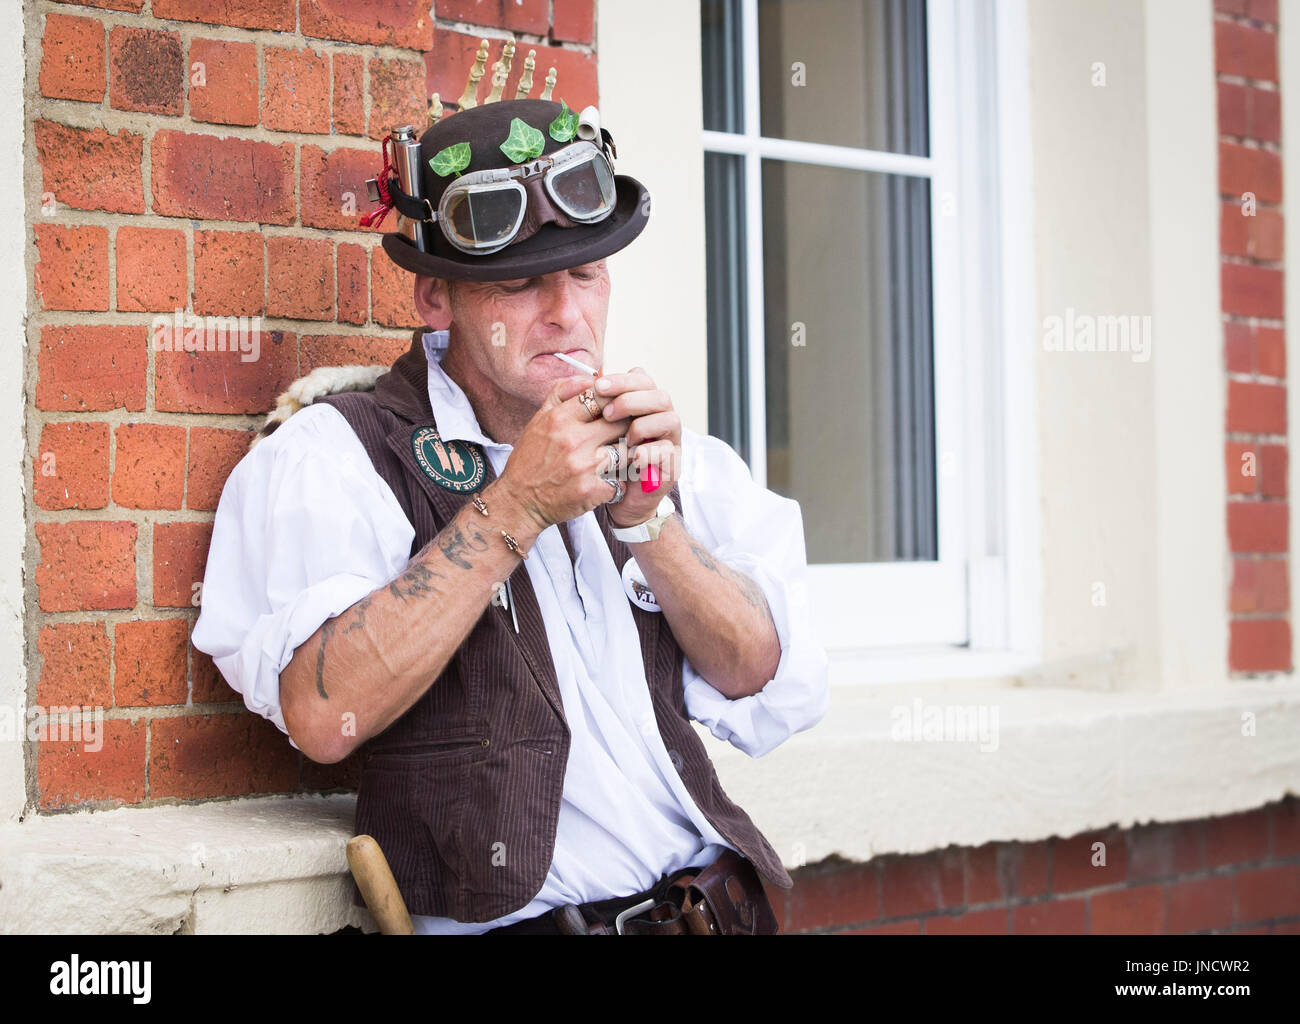 A man in costume attends the Whitby Steampunk Weekend in Whitby, Yorkshire. Stock Photo